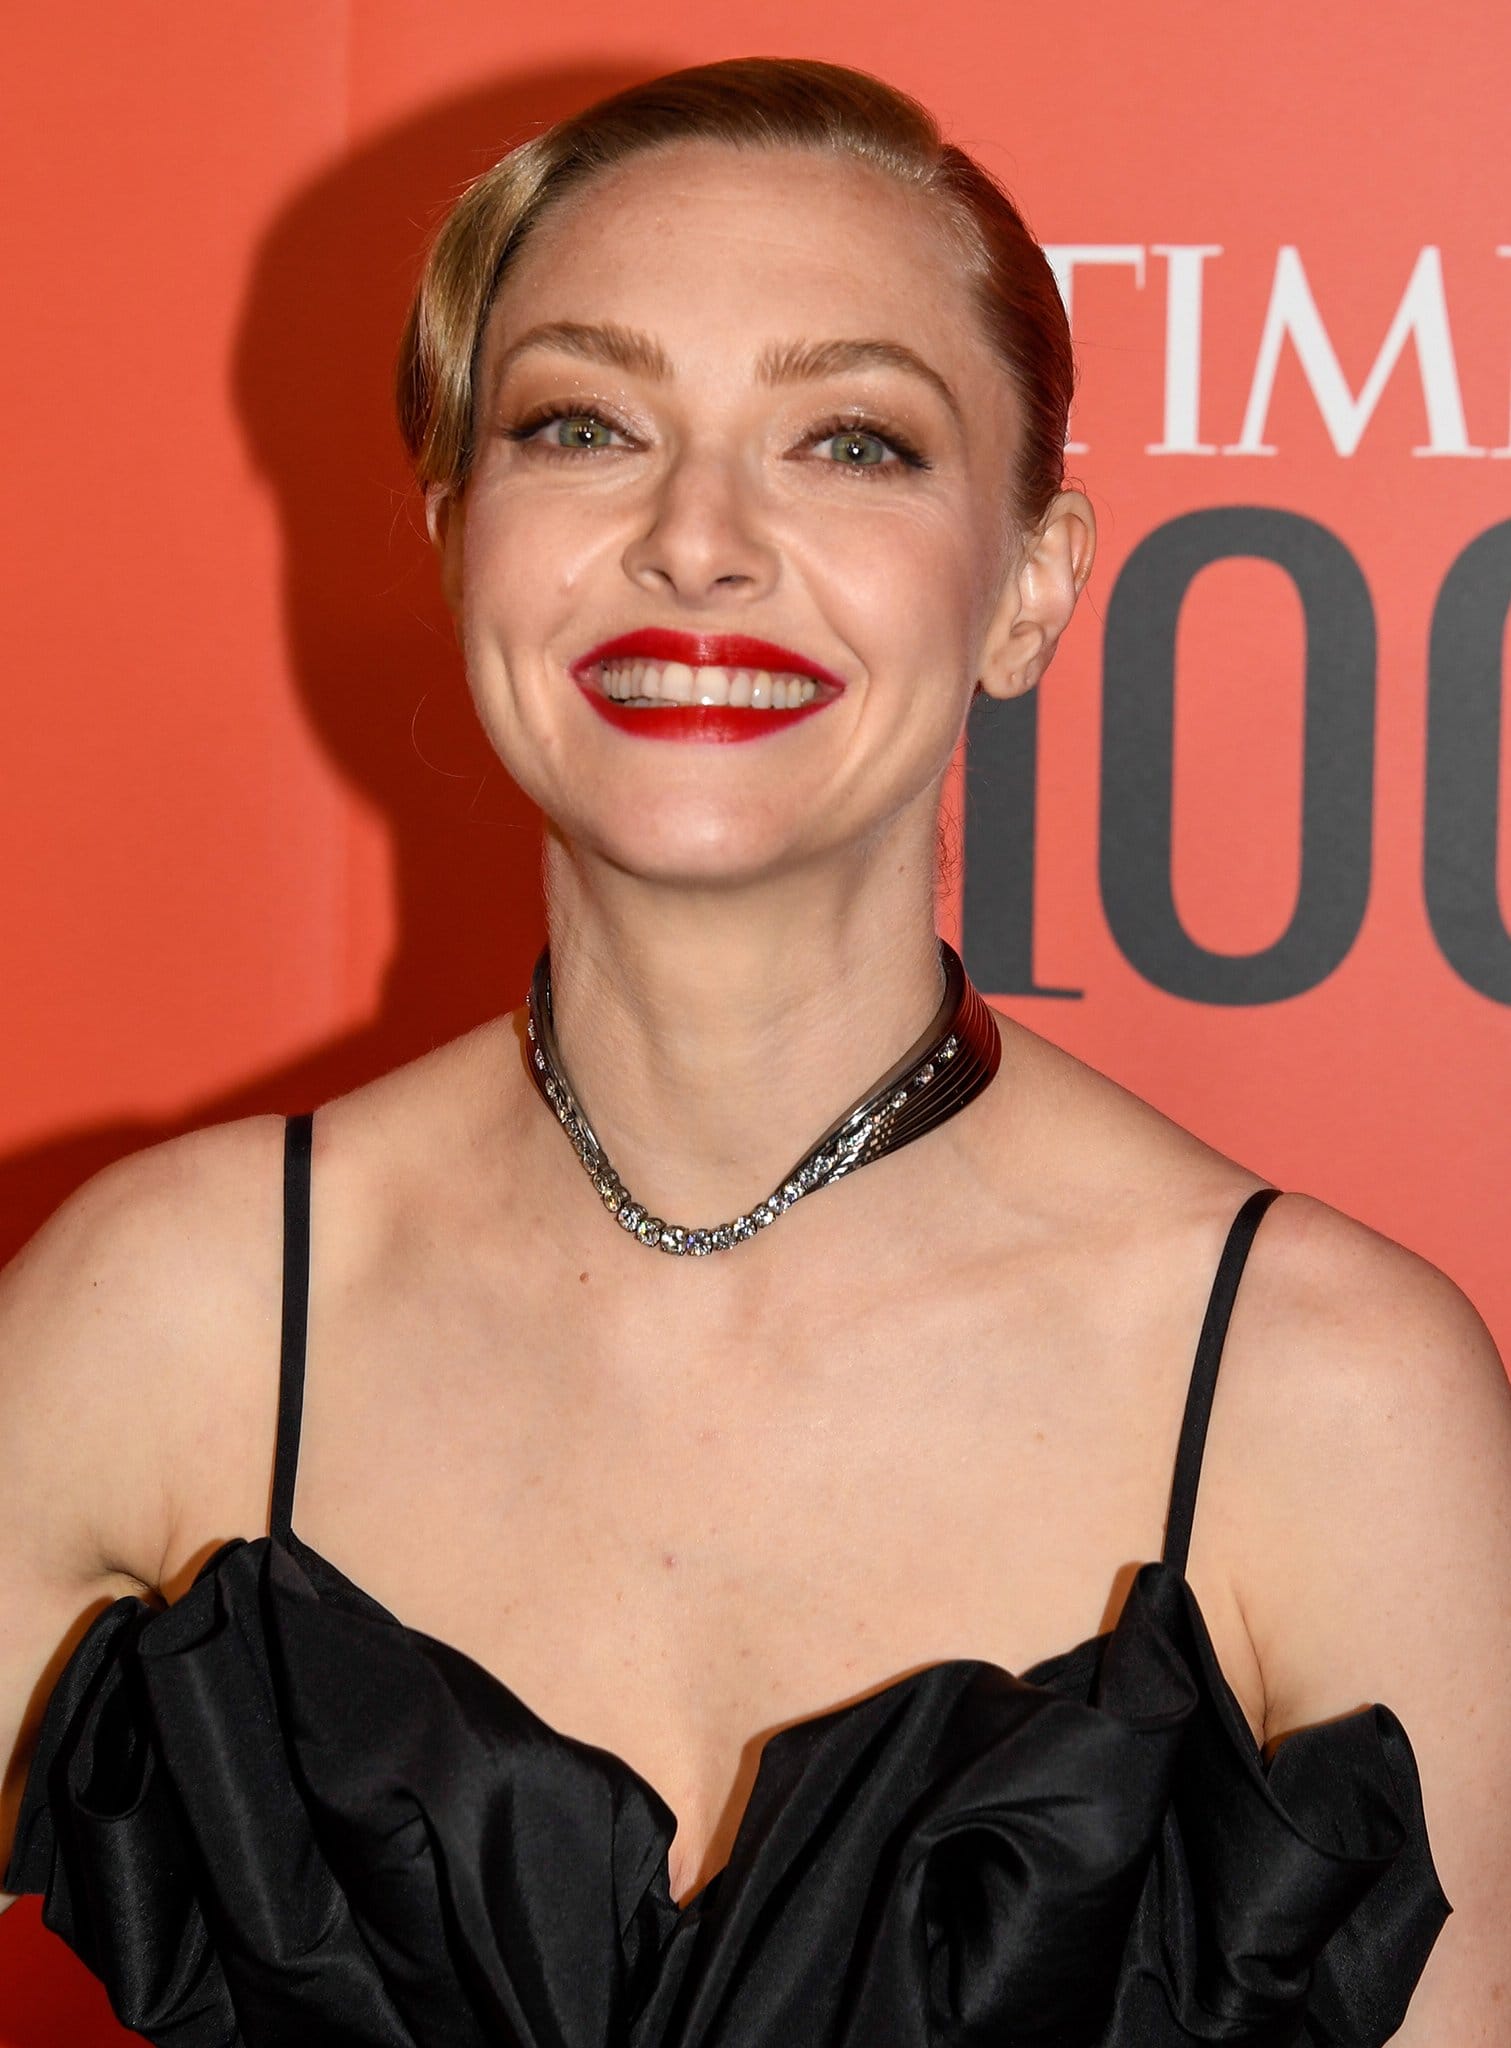 Amanda Seyfried adds a custom Almasika necklace and a swipe of bold red lip color to her black ensemble